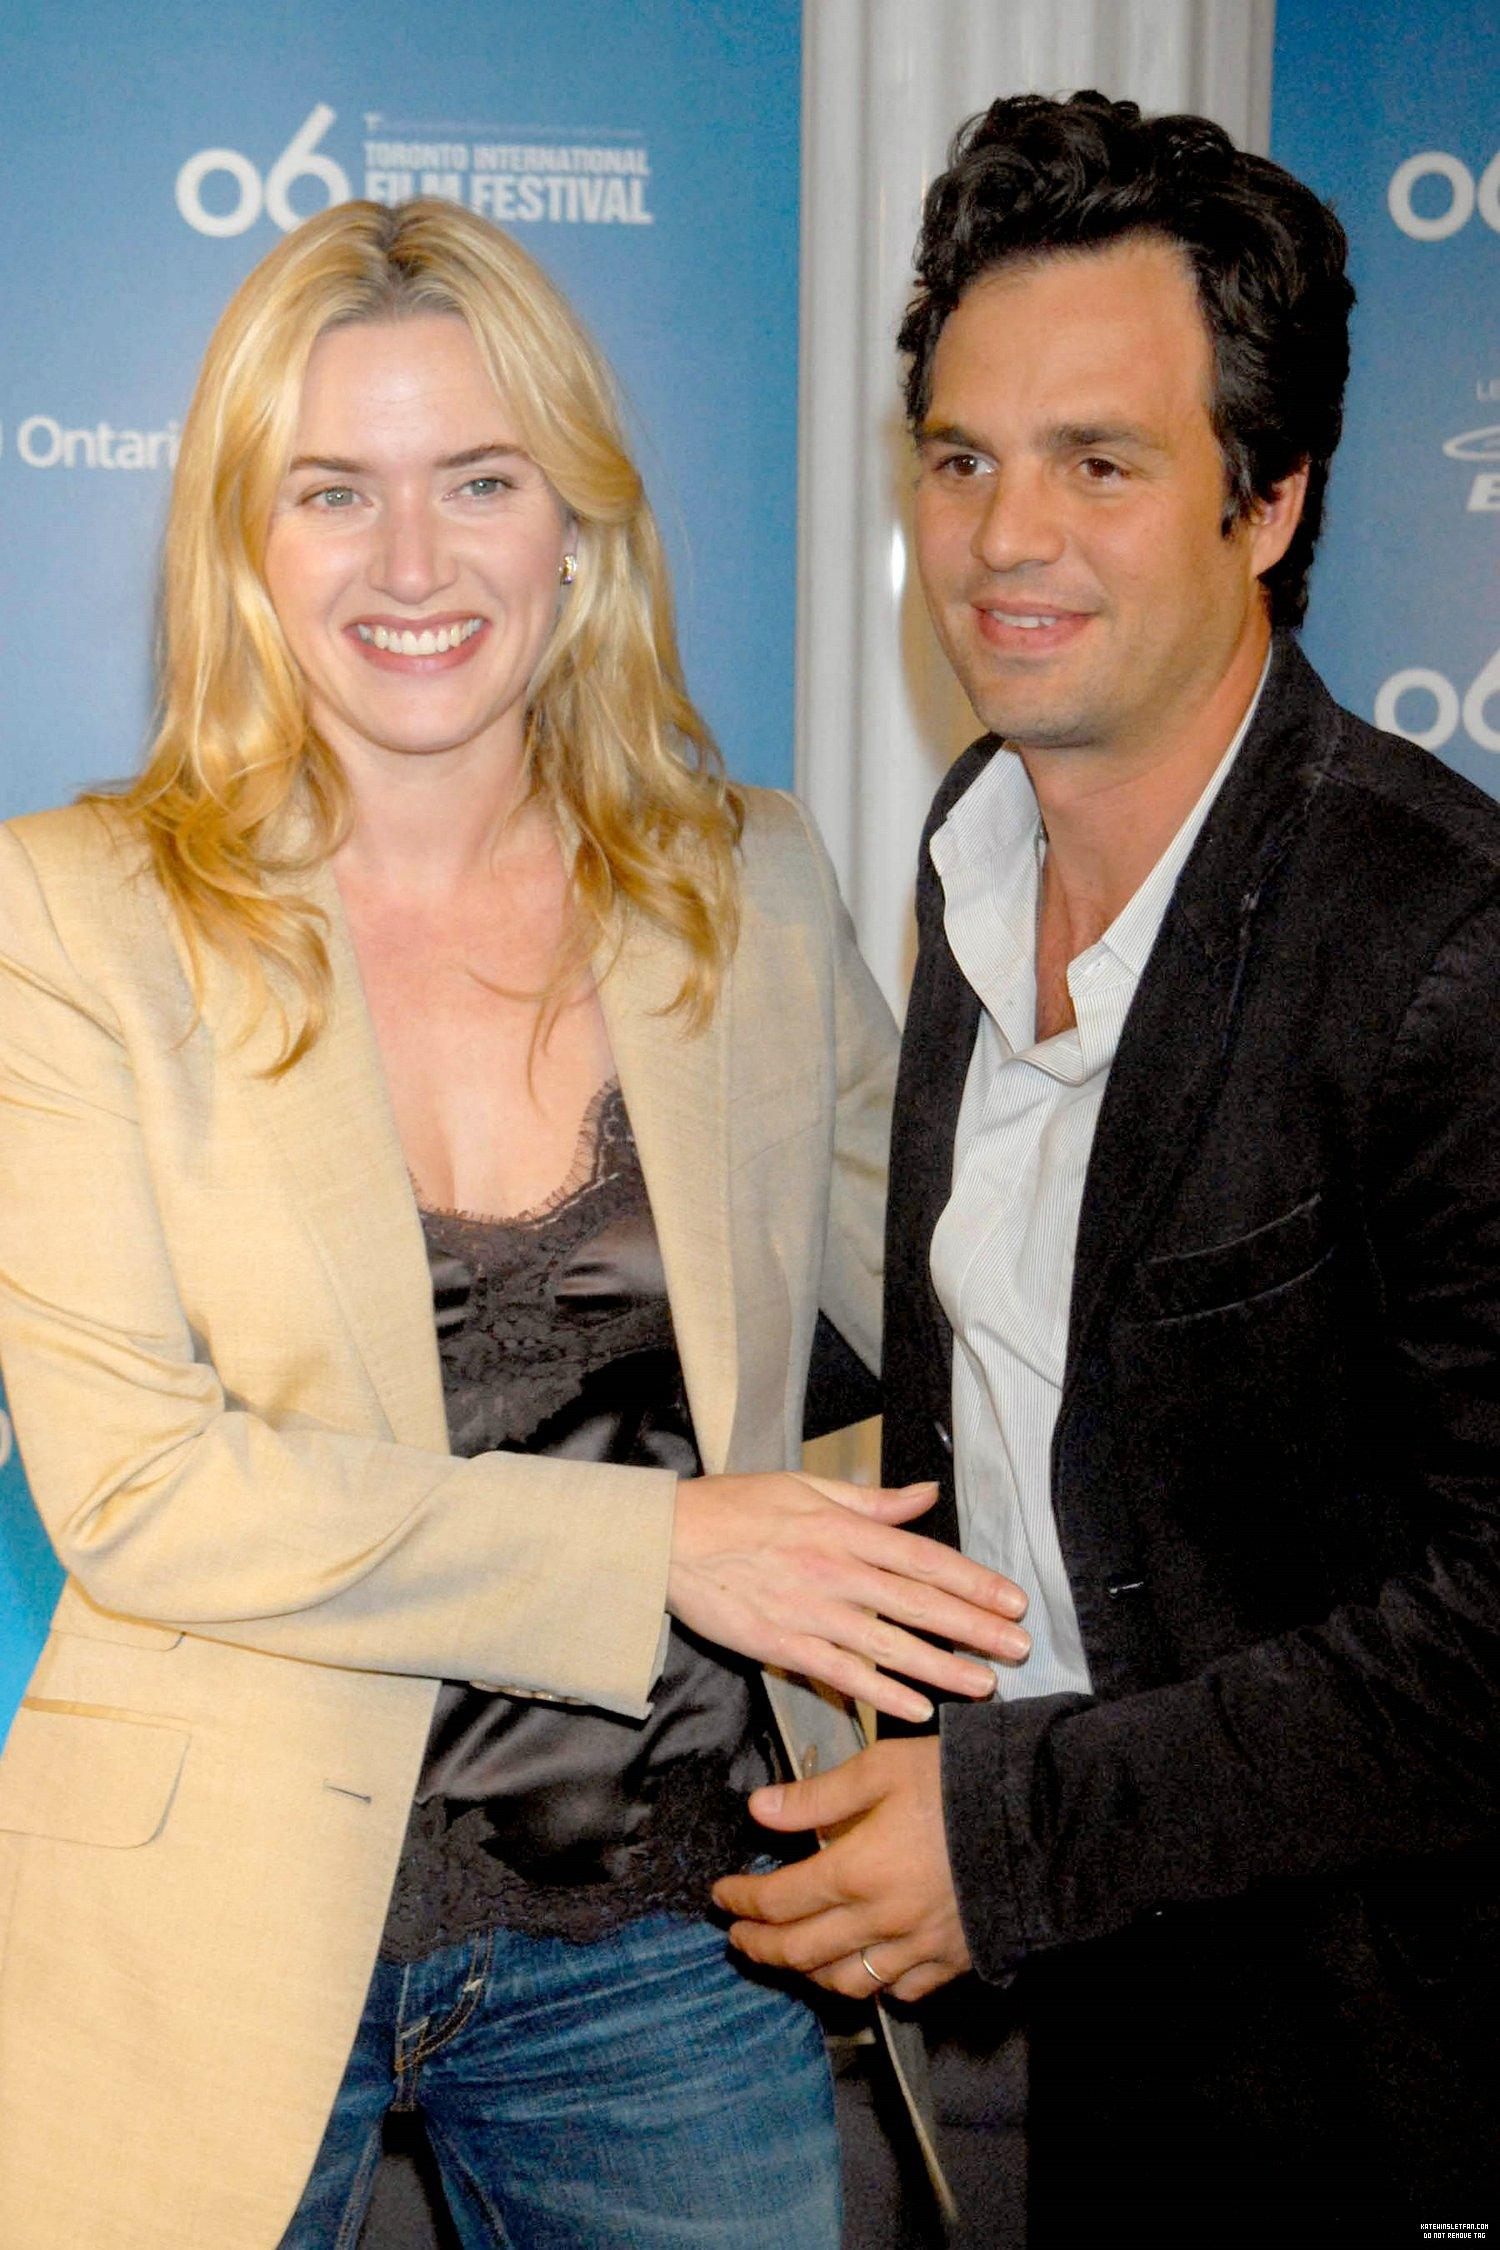 31st-annual-tiff_all-the-kings-men-press-conference_096.jpg